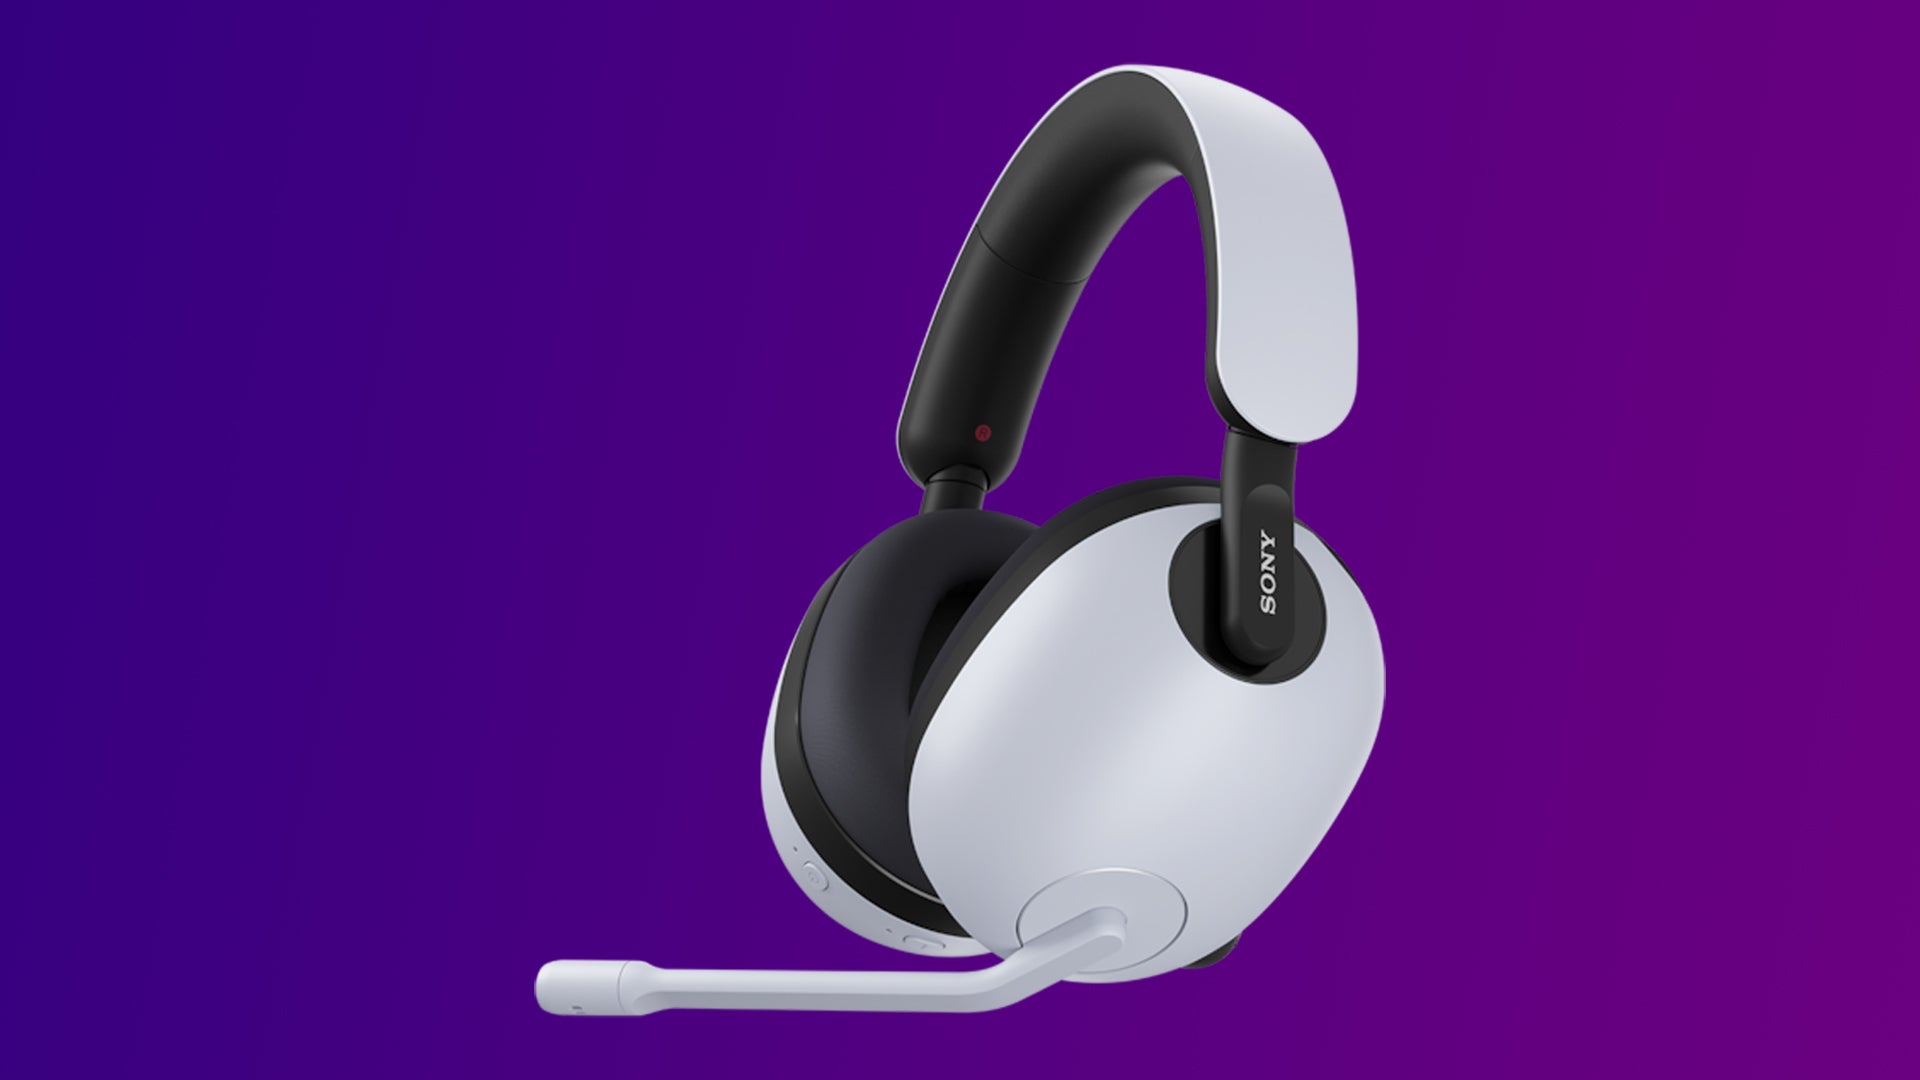 Image of a Sony Inzone H7 headset on a purple gradient background